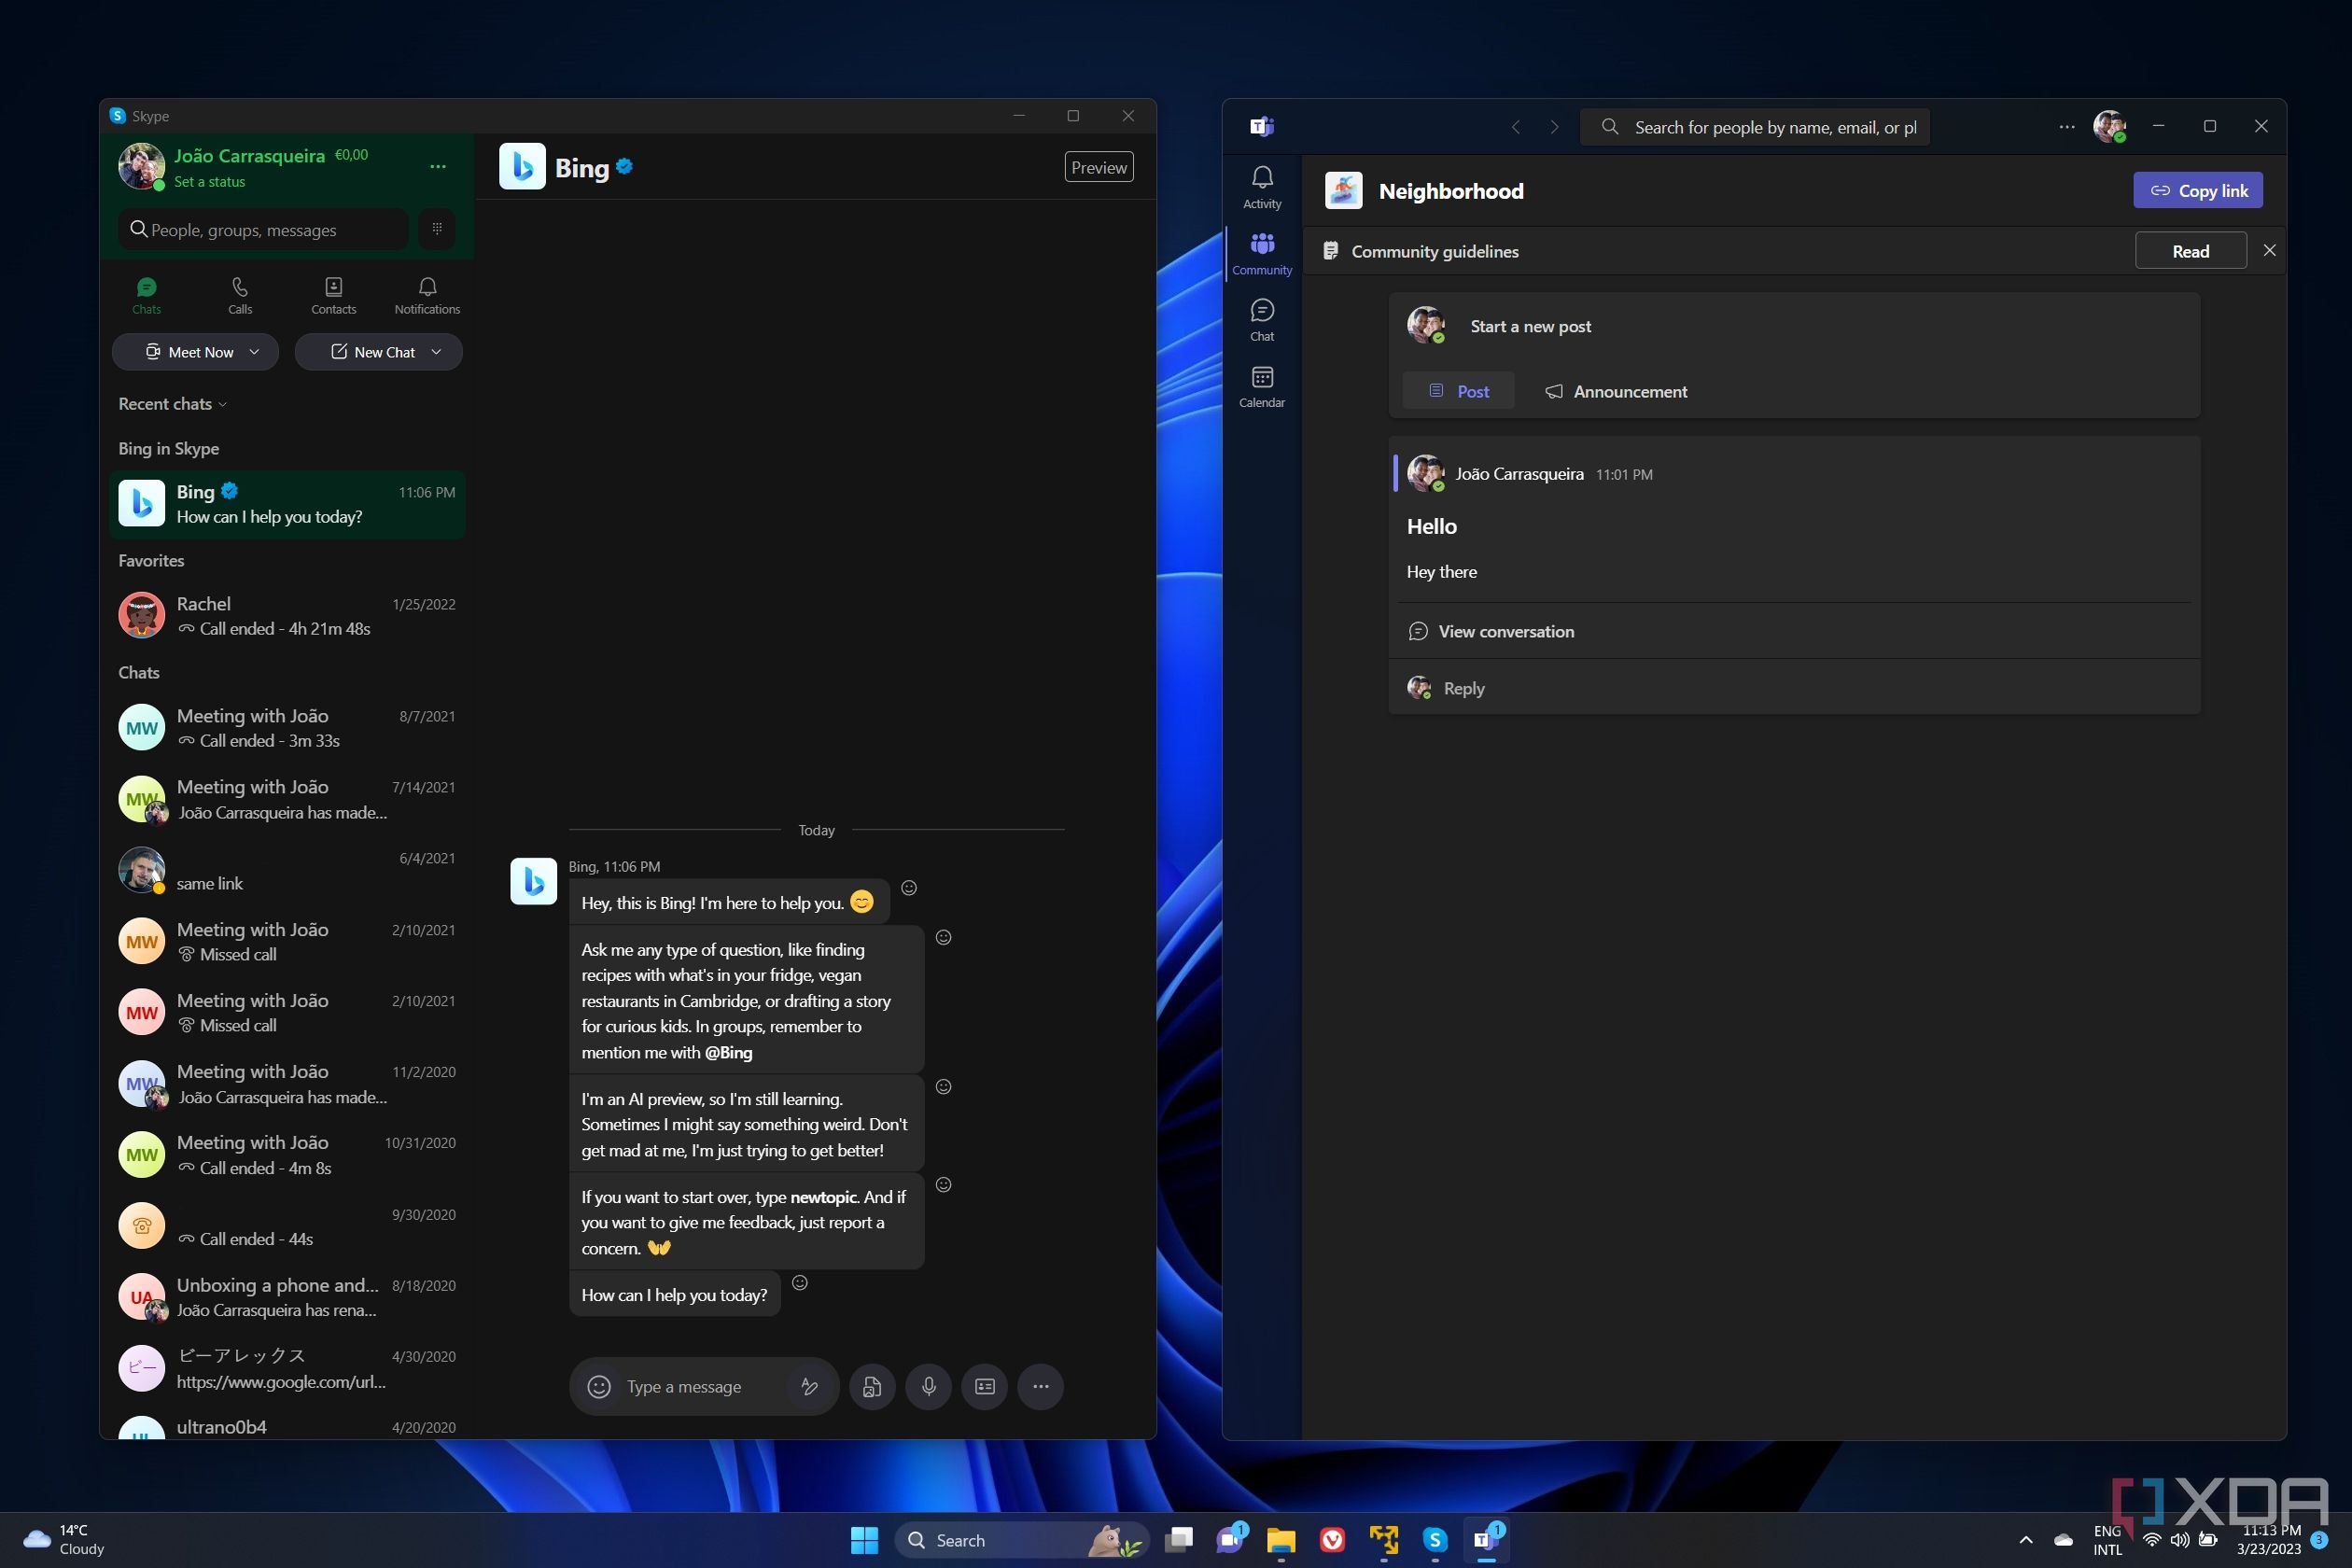 Screenshot of the Skype and Teams apps running side-by-side. Skype is displaying Bing integration, while Teams is showing the Communities feature